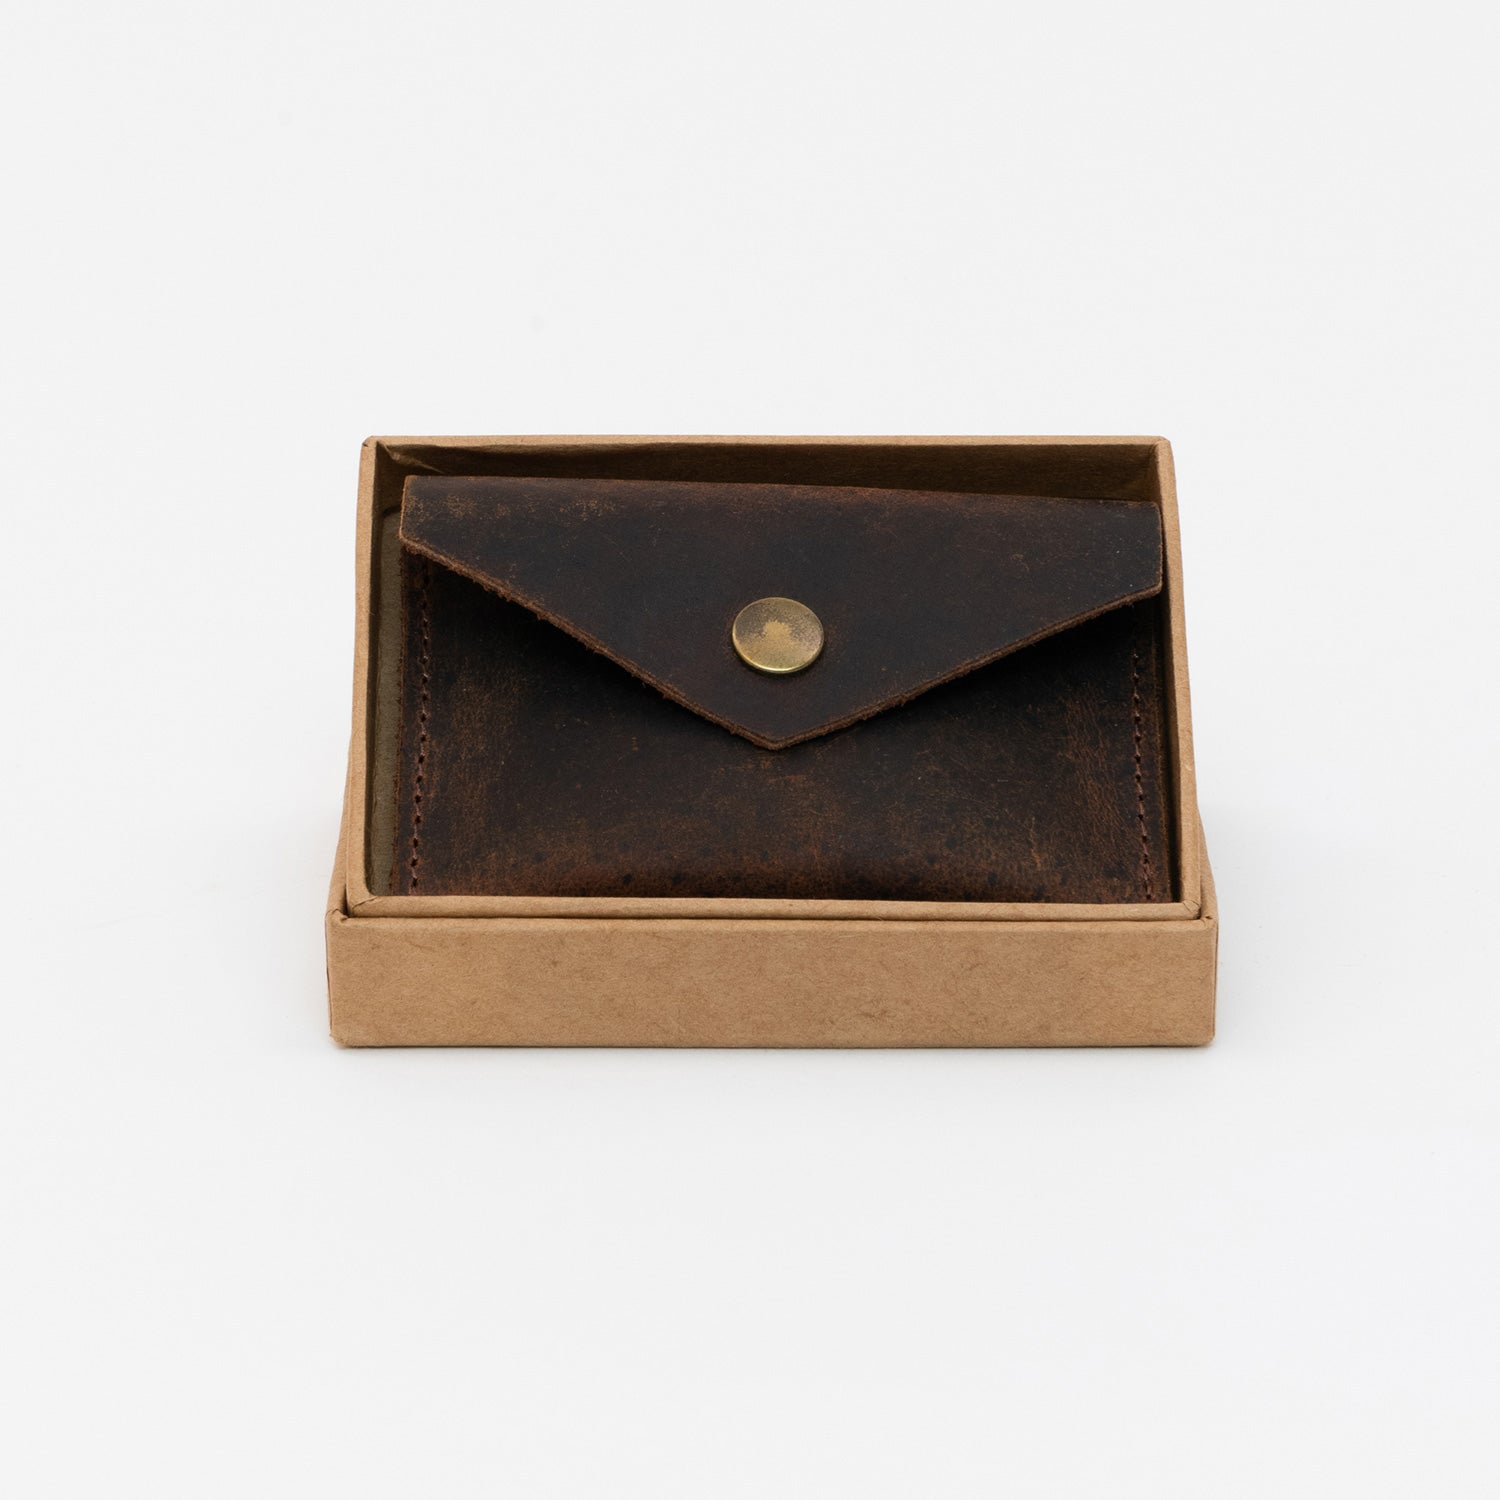 Dark brown leather coin pouch with brass popper inside the tan box.